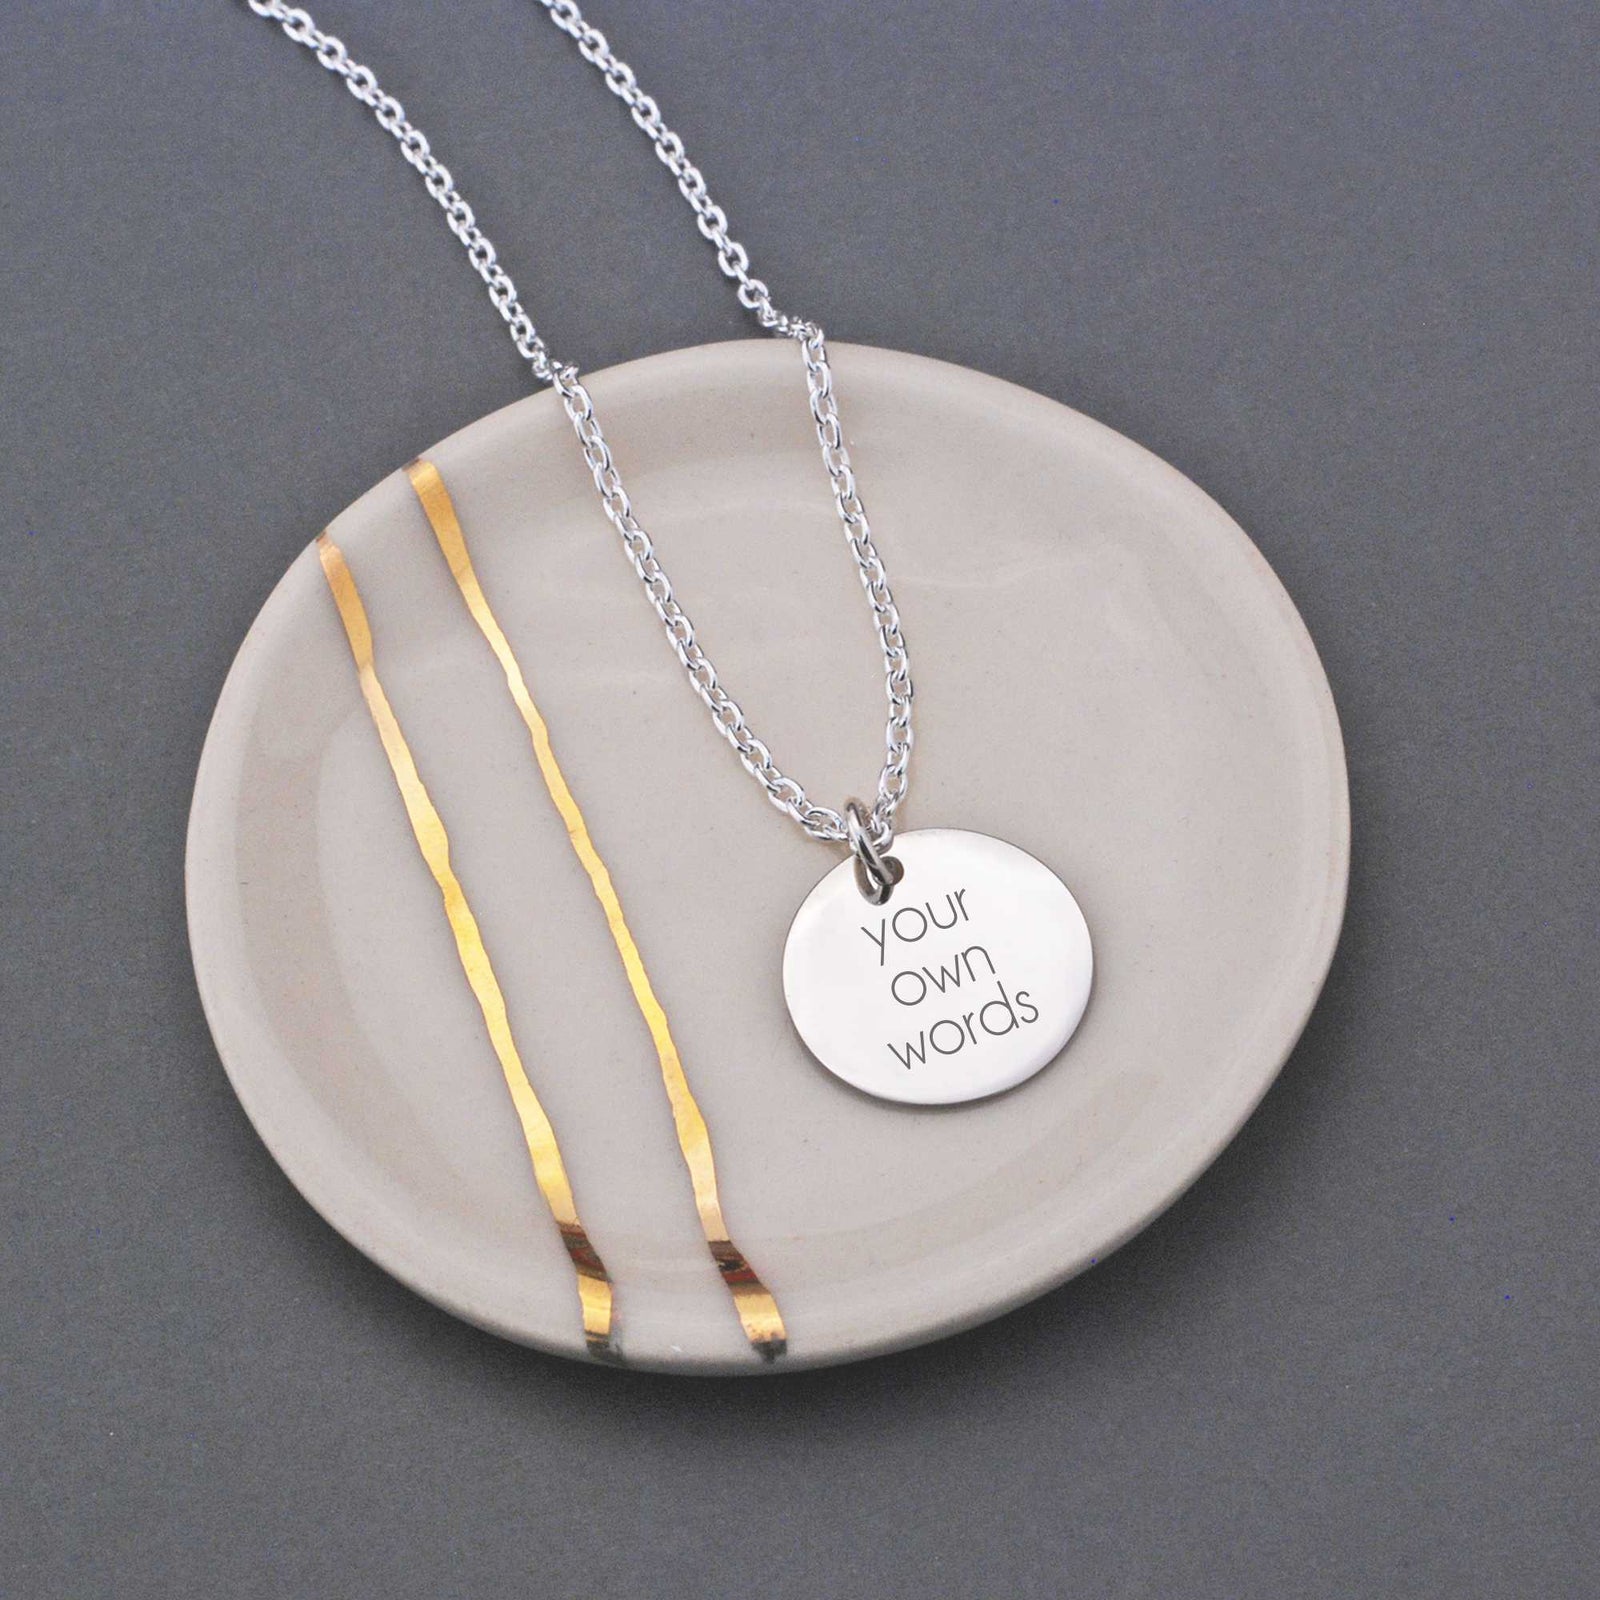 Round Charm Necklace Engraved with Your Own Words